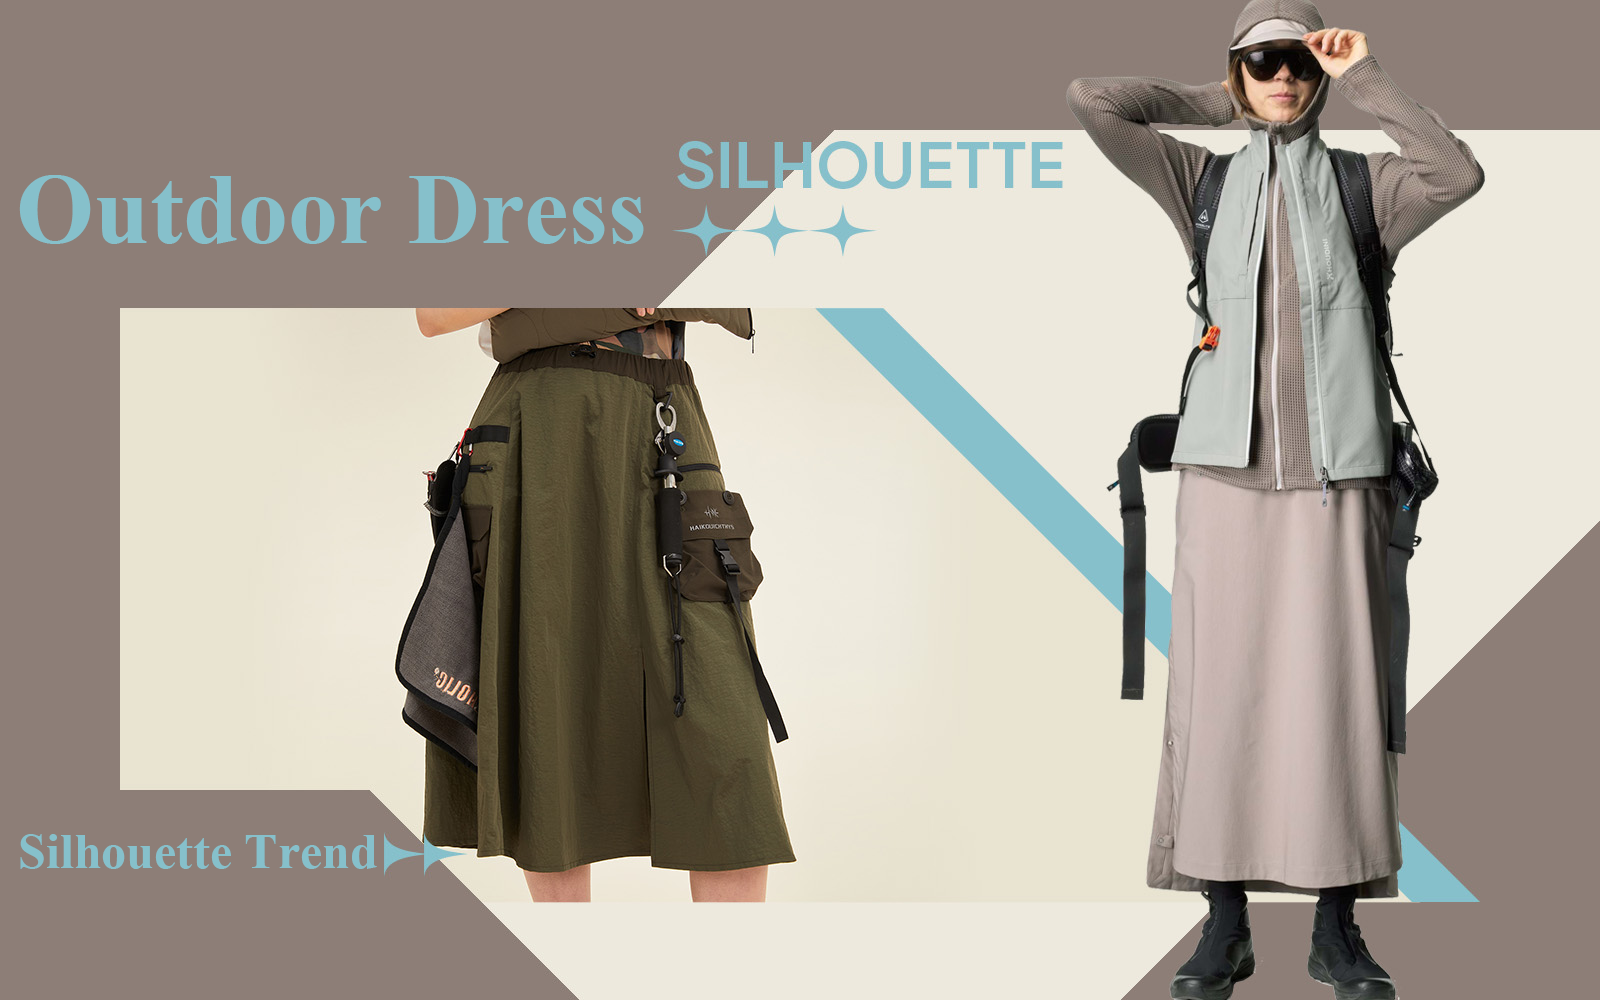 Chase the Mountain Wind -- The Silhouette Trend for Women's Outdoor Dress